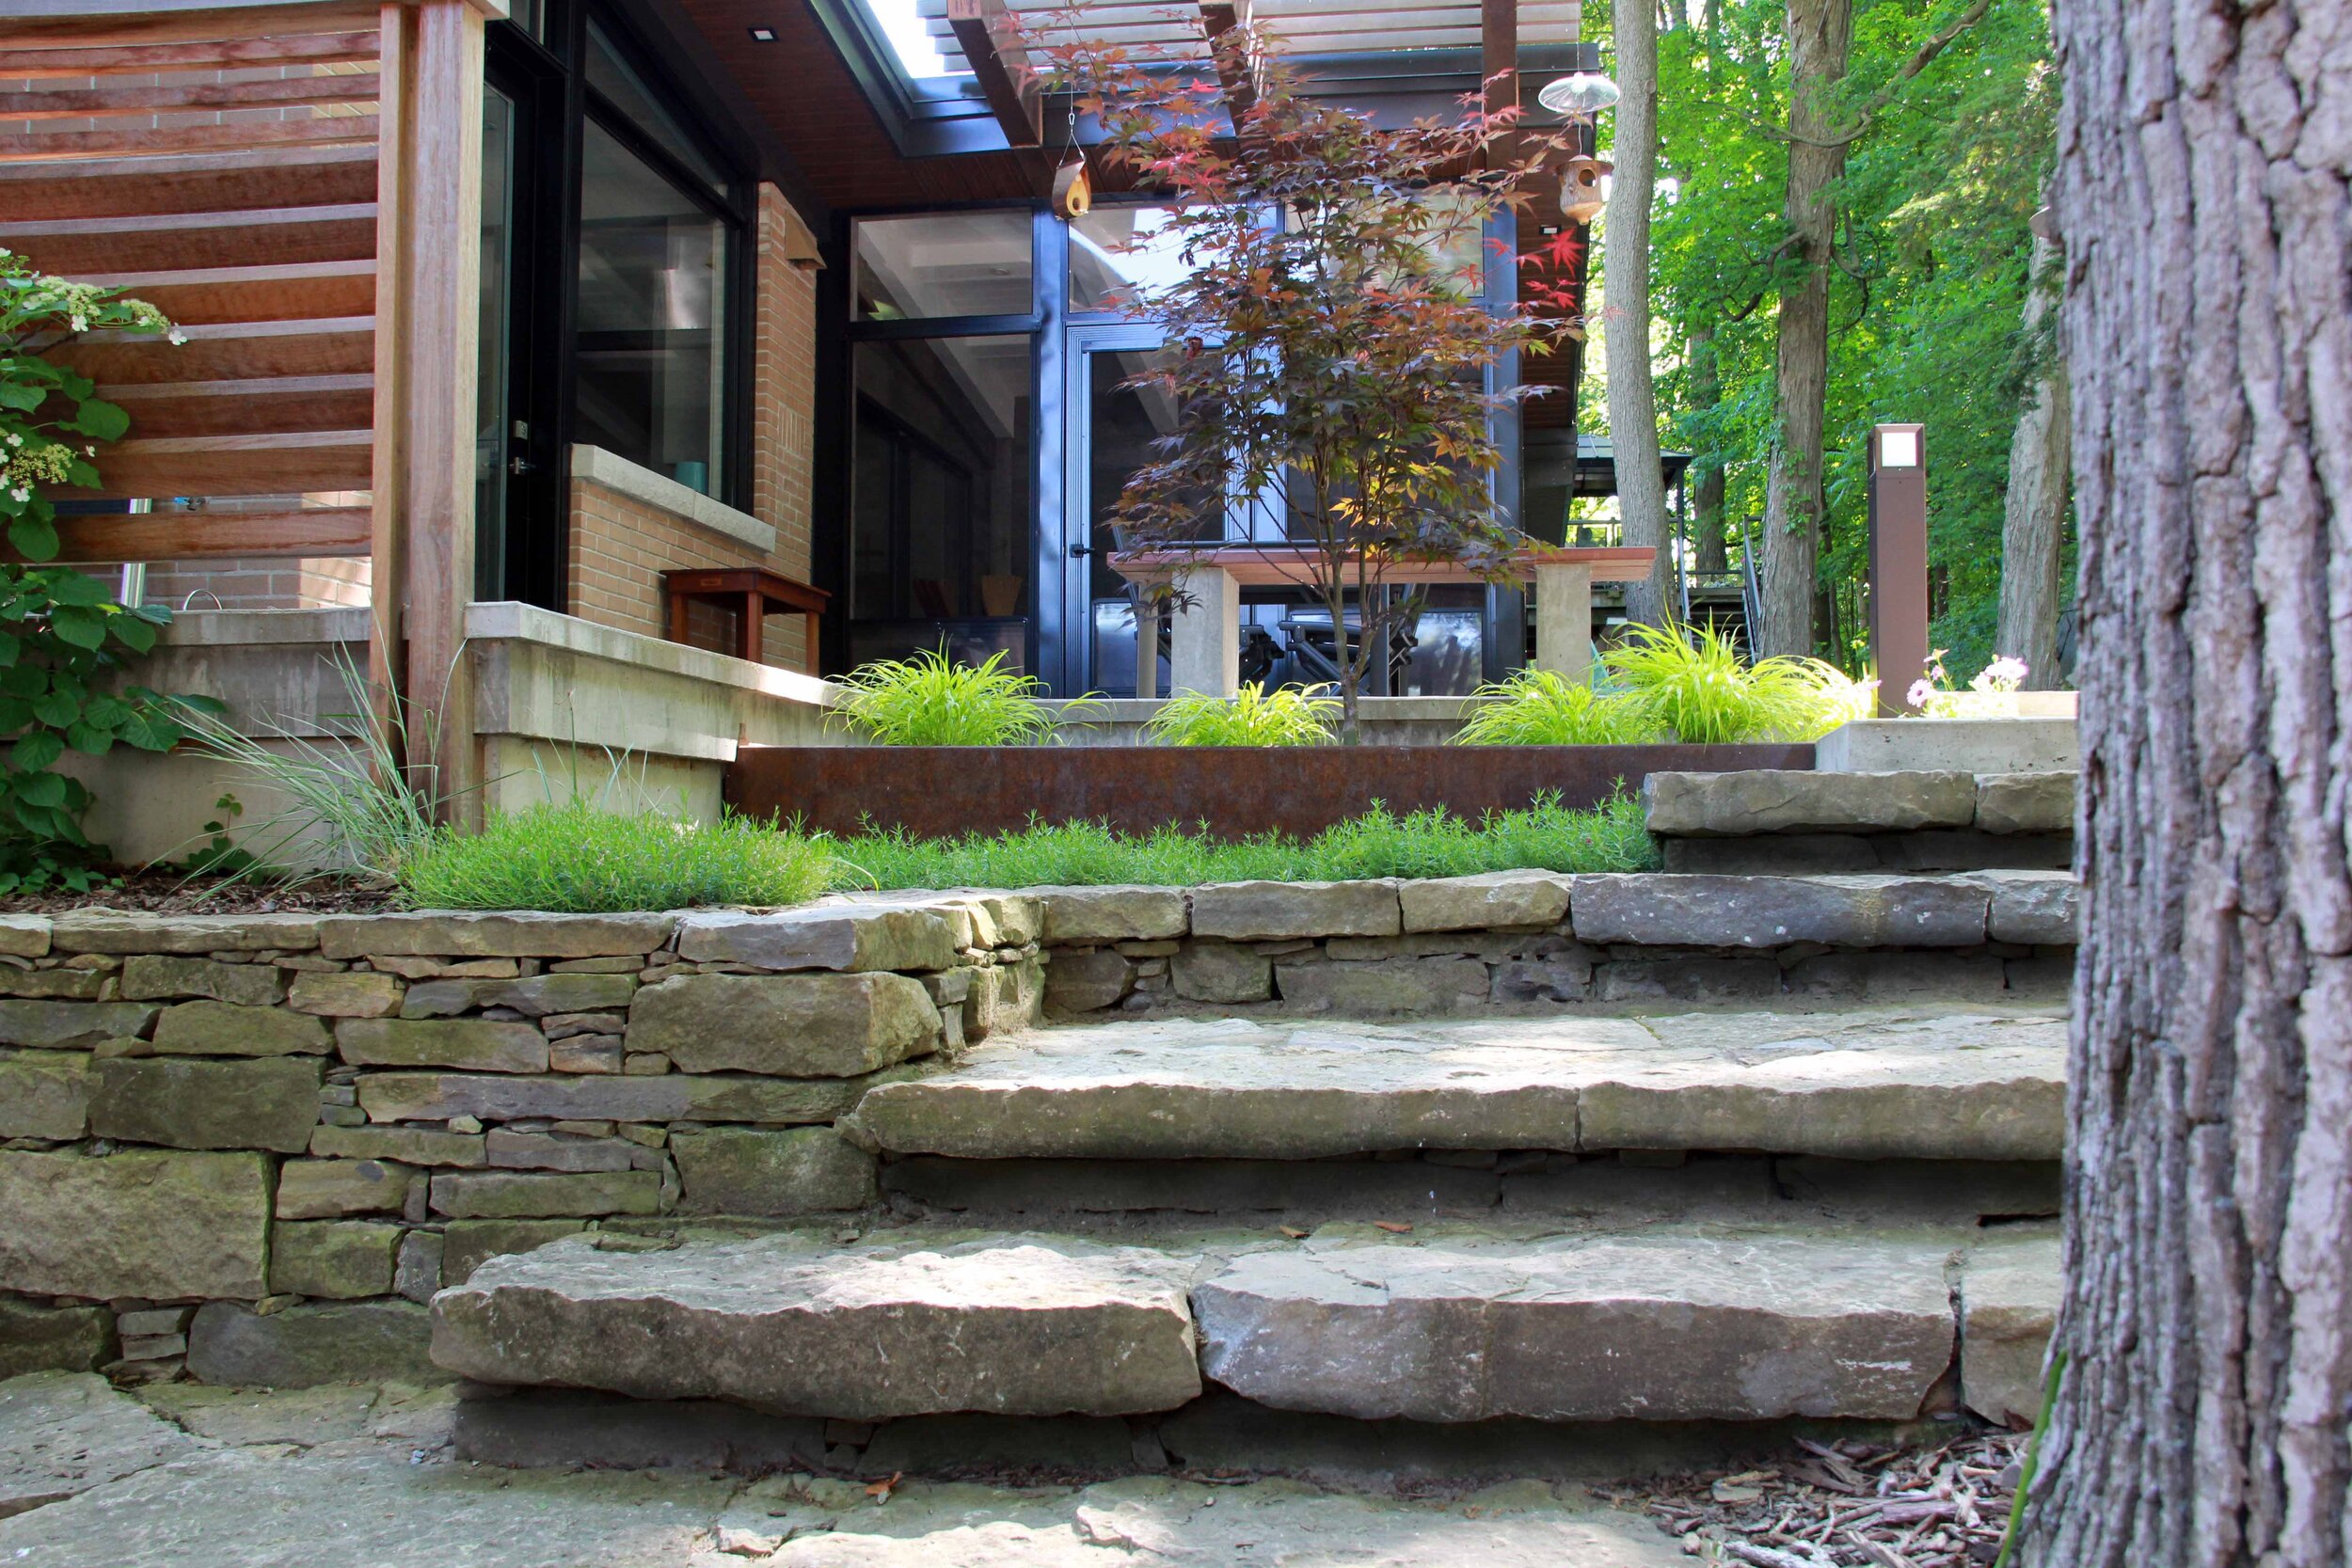 Natural stone steps-Dry laid stone-Mid Century Modern- creeper-Landscape Gardening-Hardscaping-Corten Steel-privacy screen-Japanese Maple.jpg